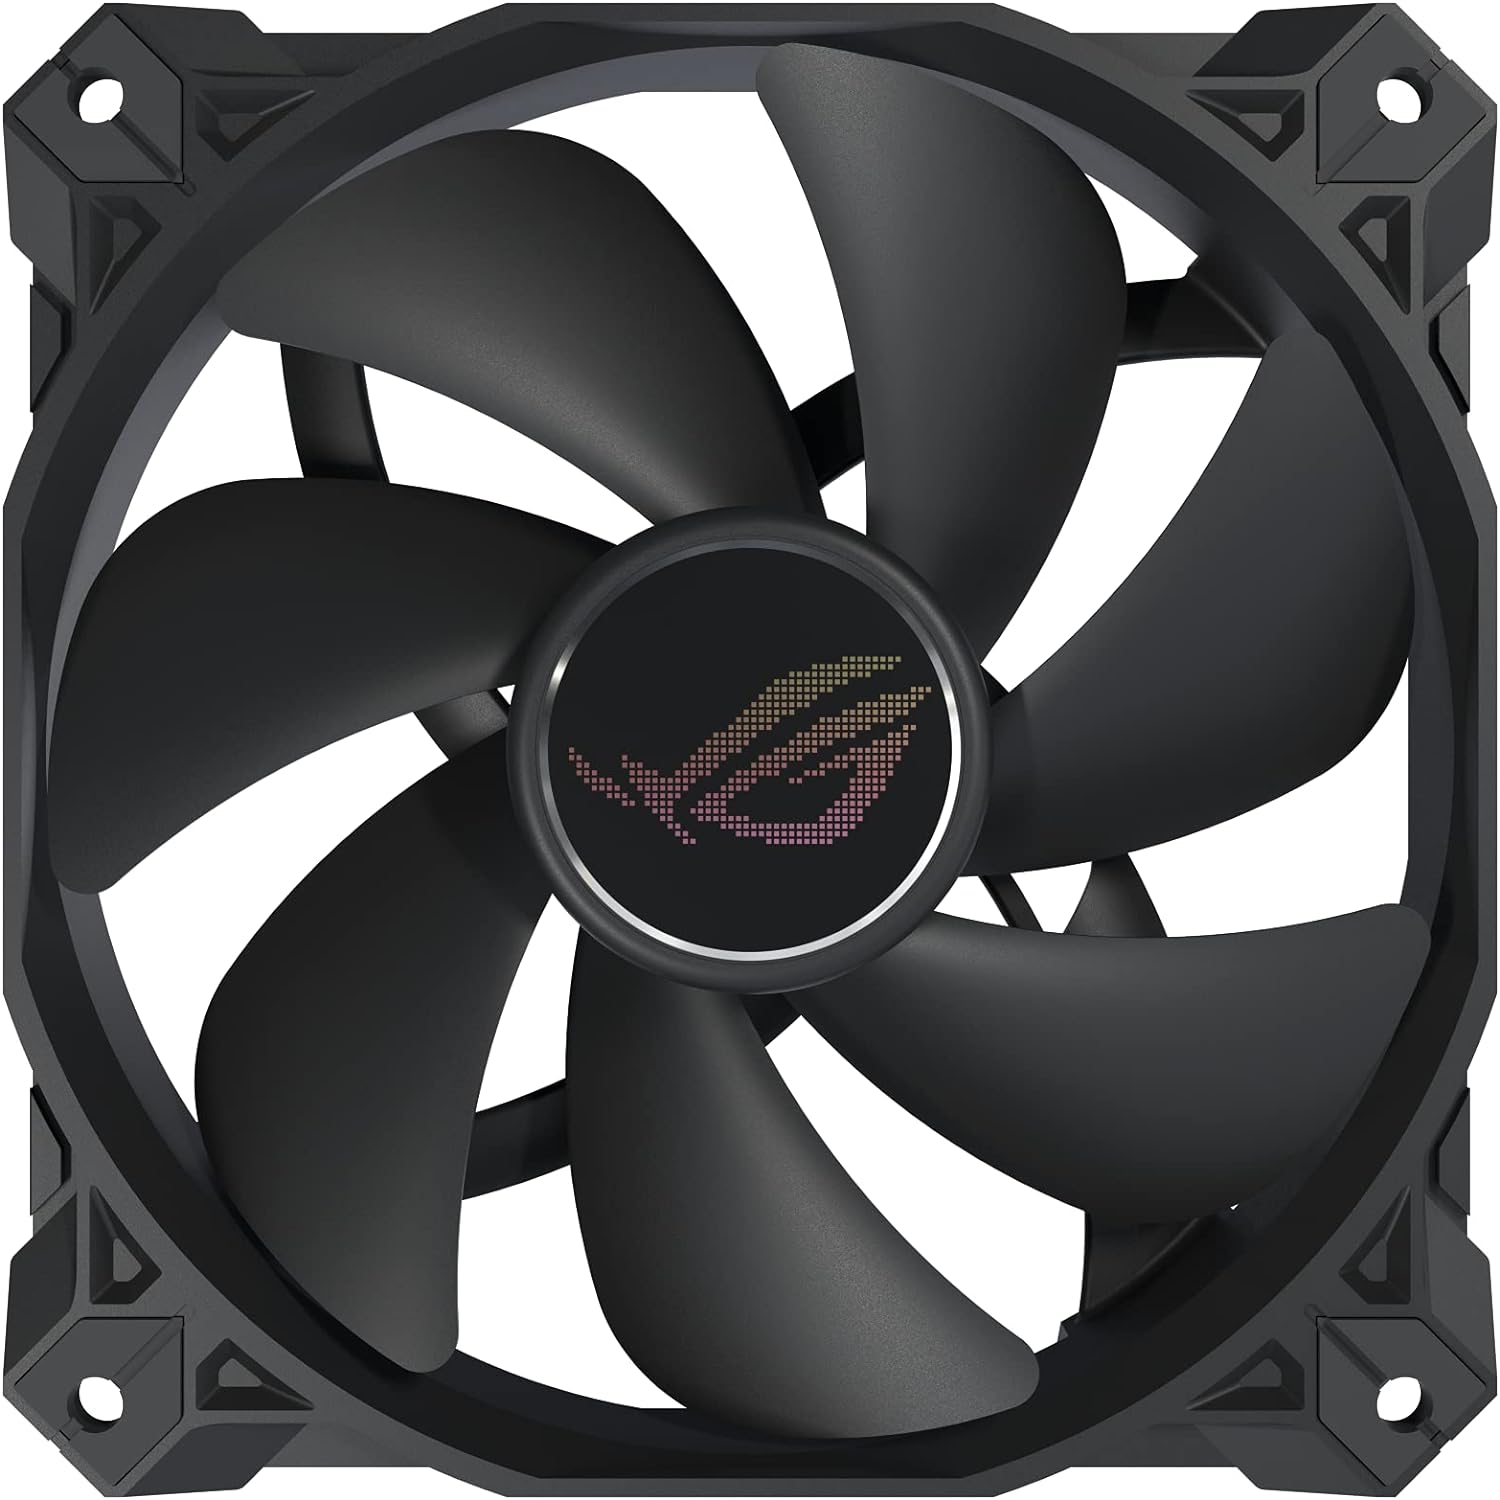 $13 ASUS ROG Strix XF120 Whisper-Quiet, 4-pin PWM Fan for PC Cases, Radiators or CPU Cooling